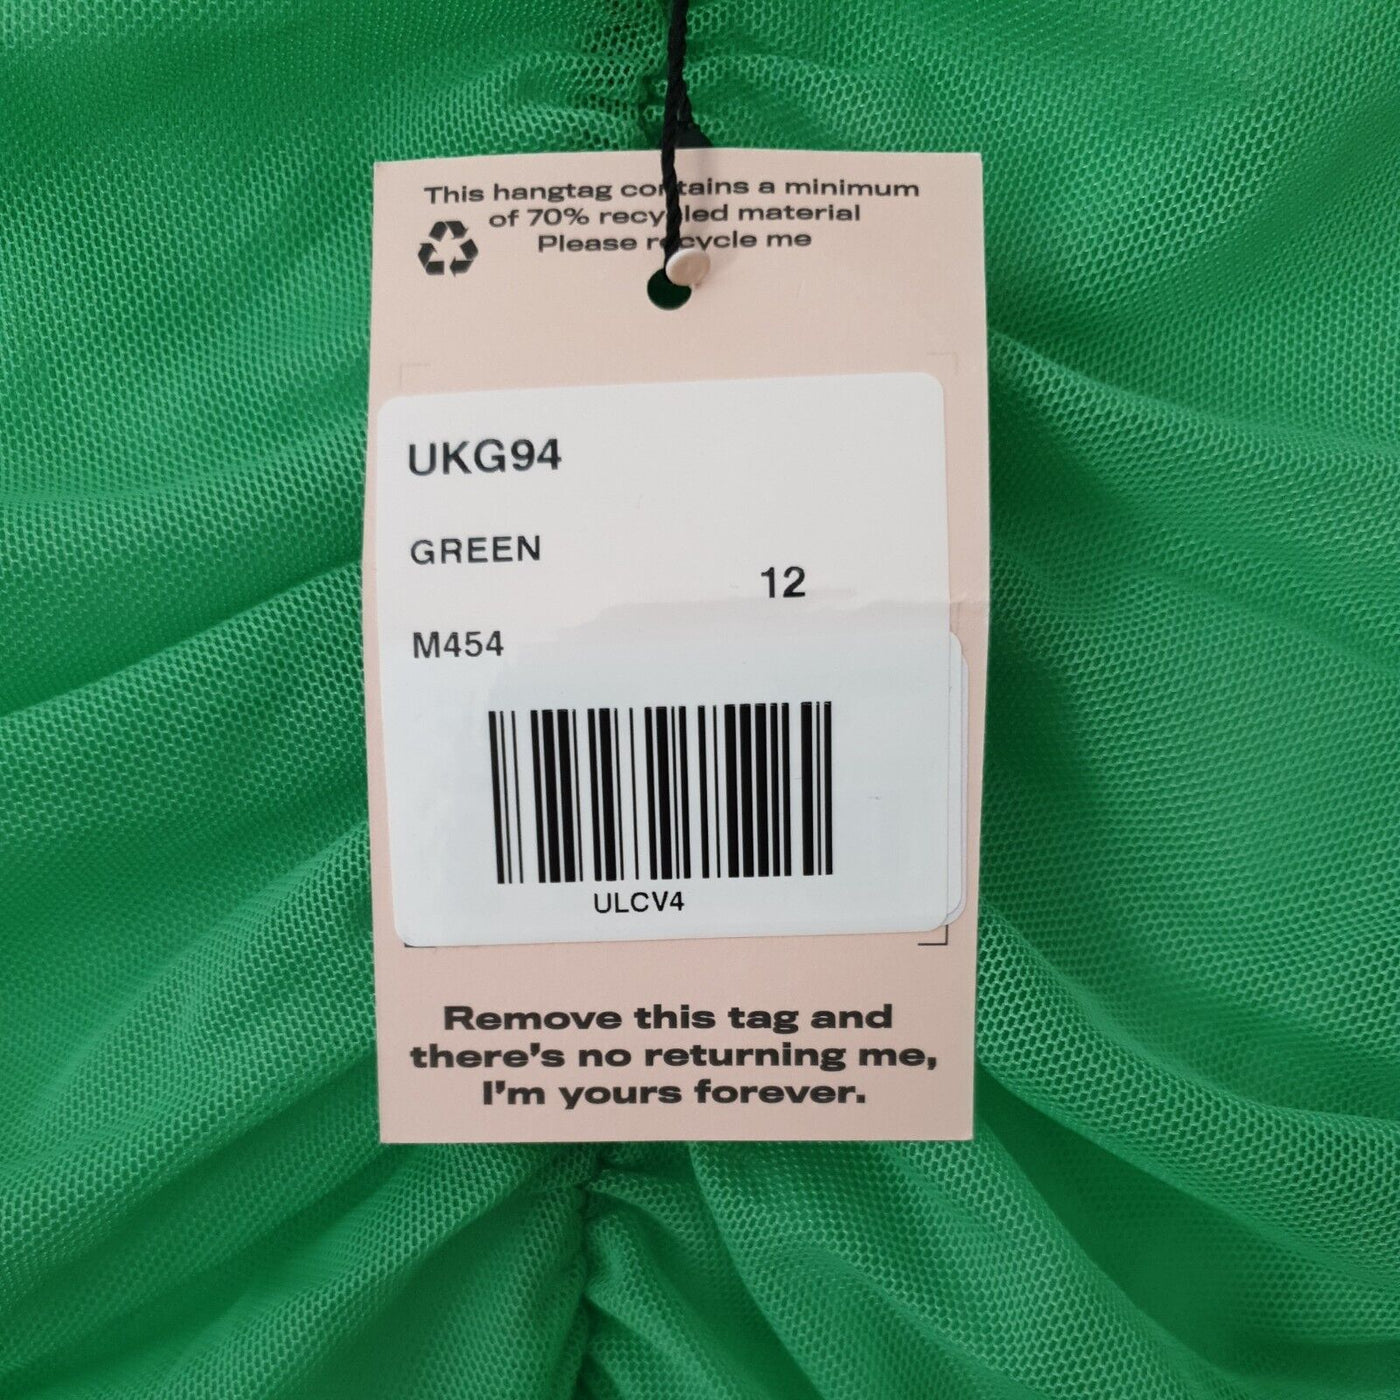 Missguided Dress Mesh Ruched Green. UK 12.